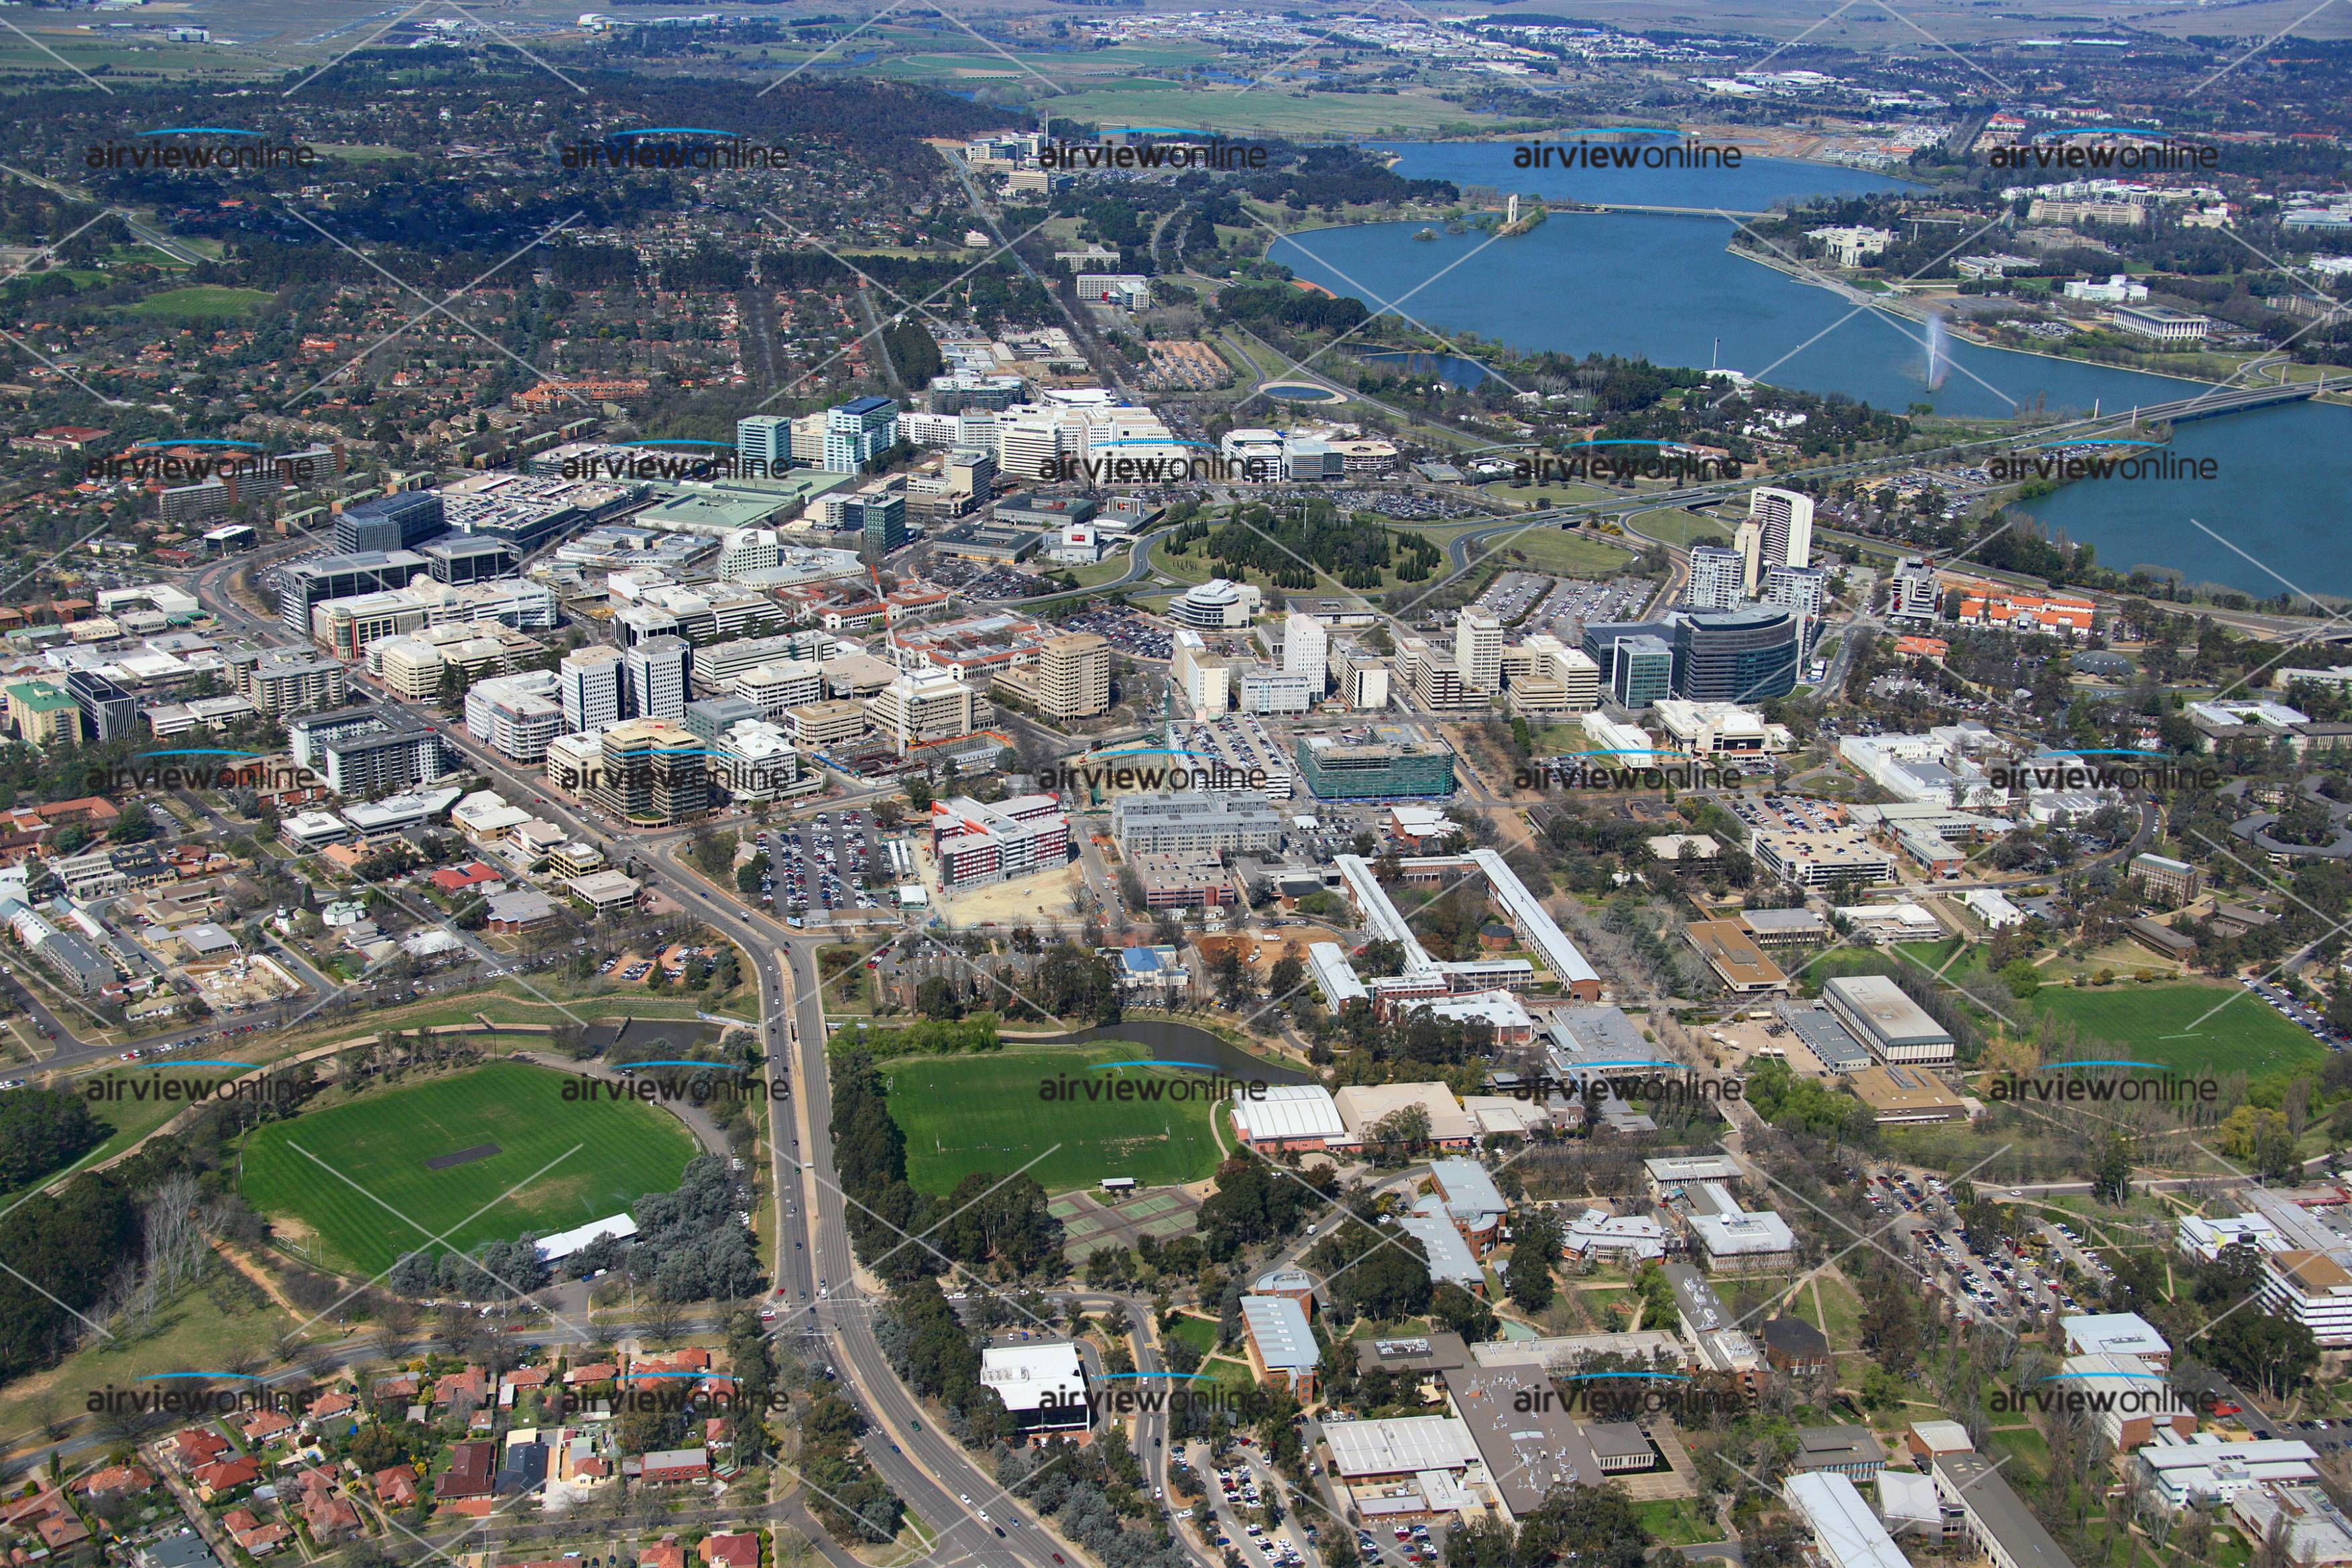 Aerial Photography Canberra City Act Australia Airview Online